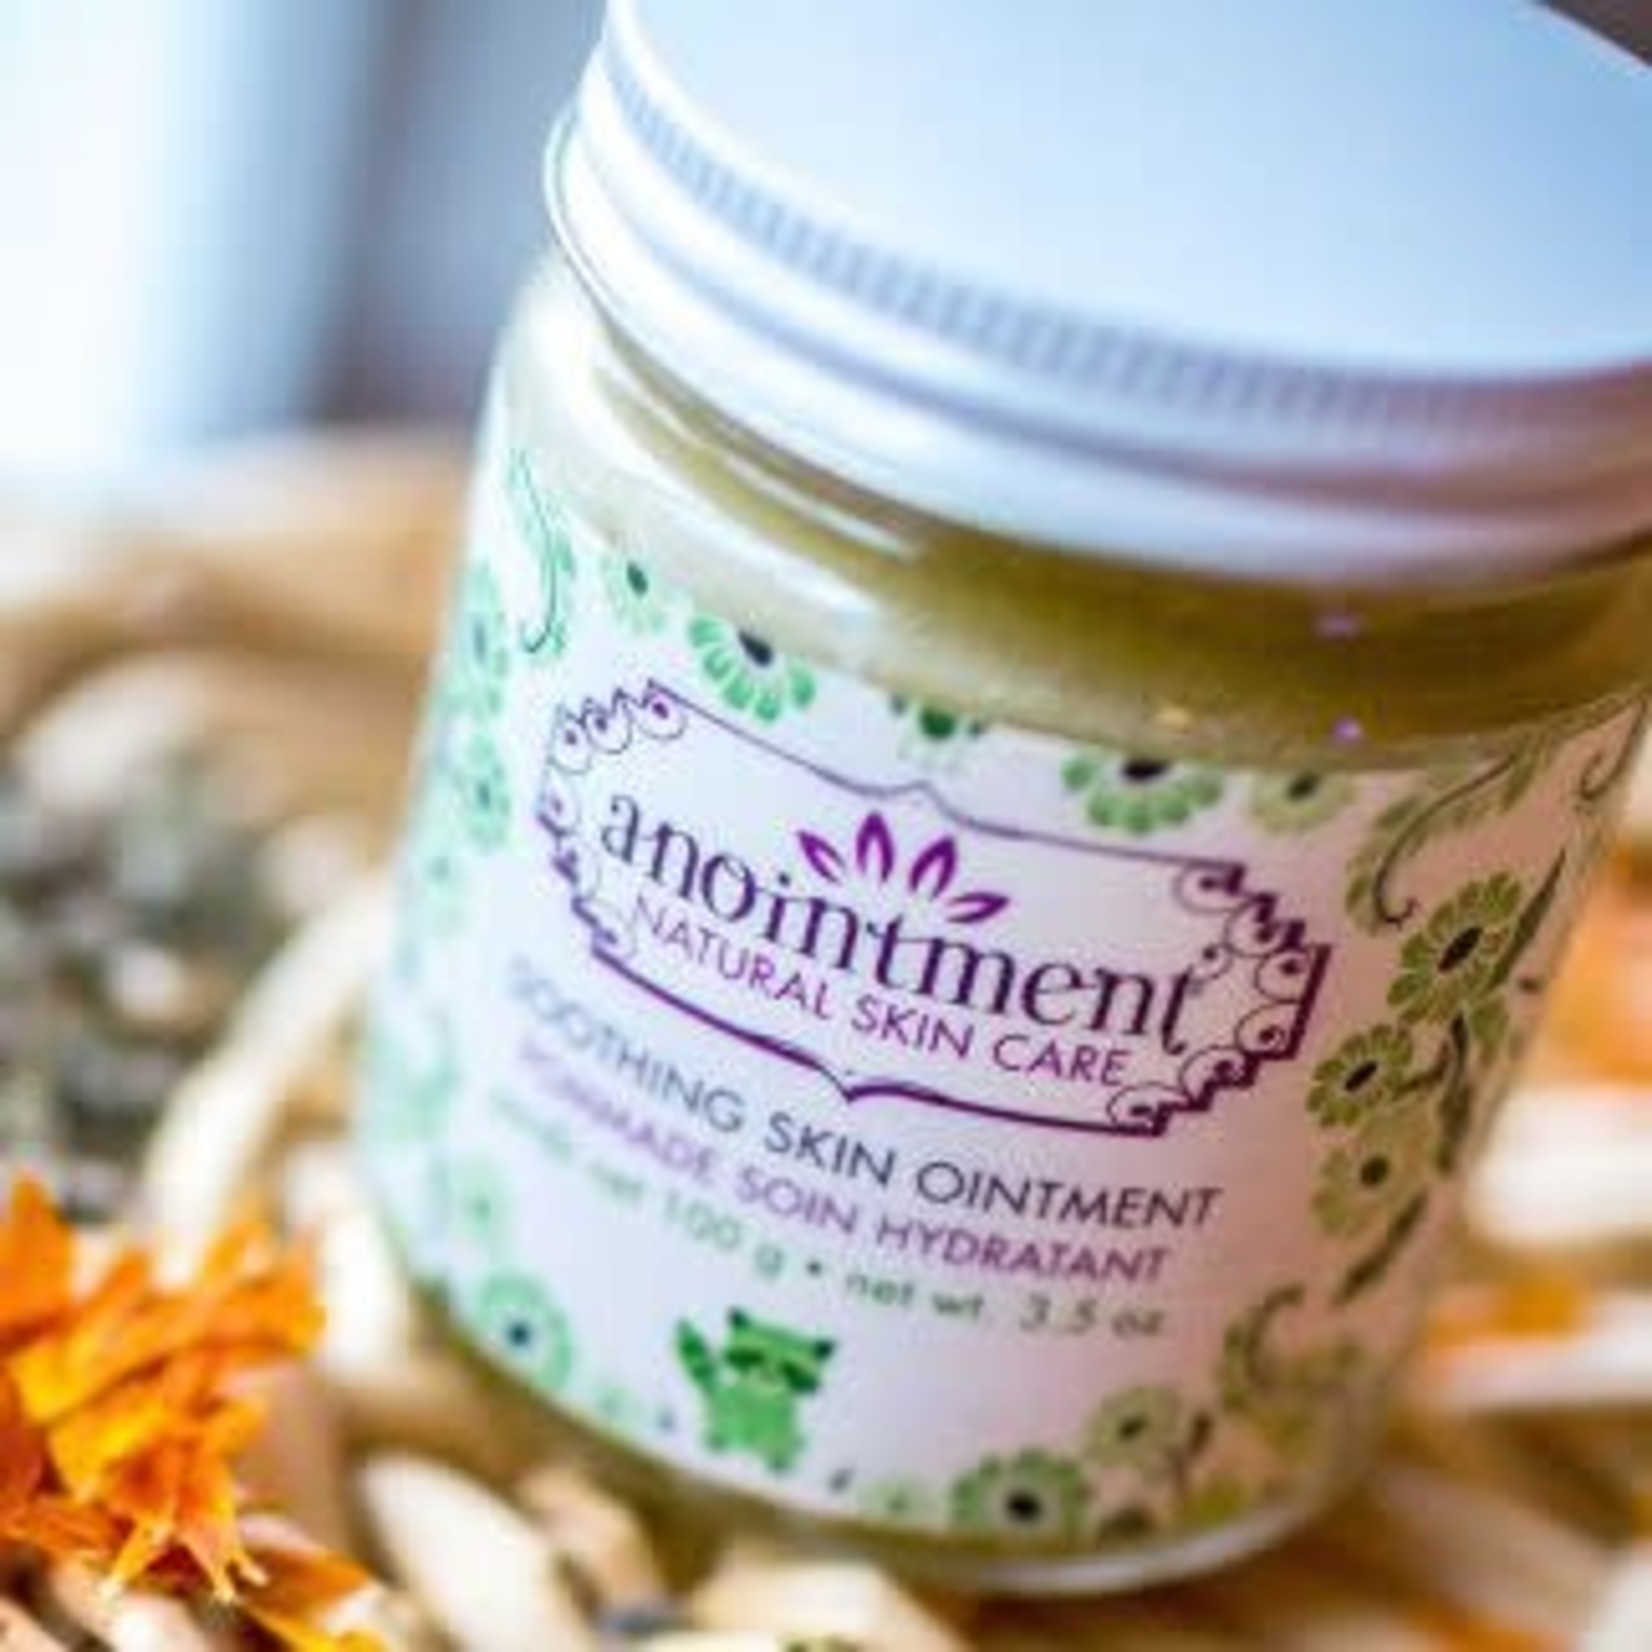 Anointment Natural Skin Care Baby Care